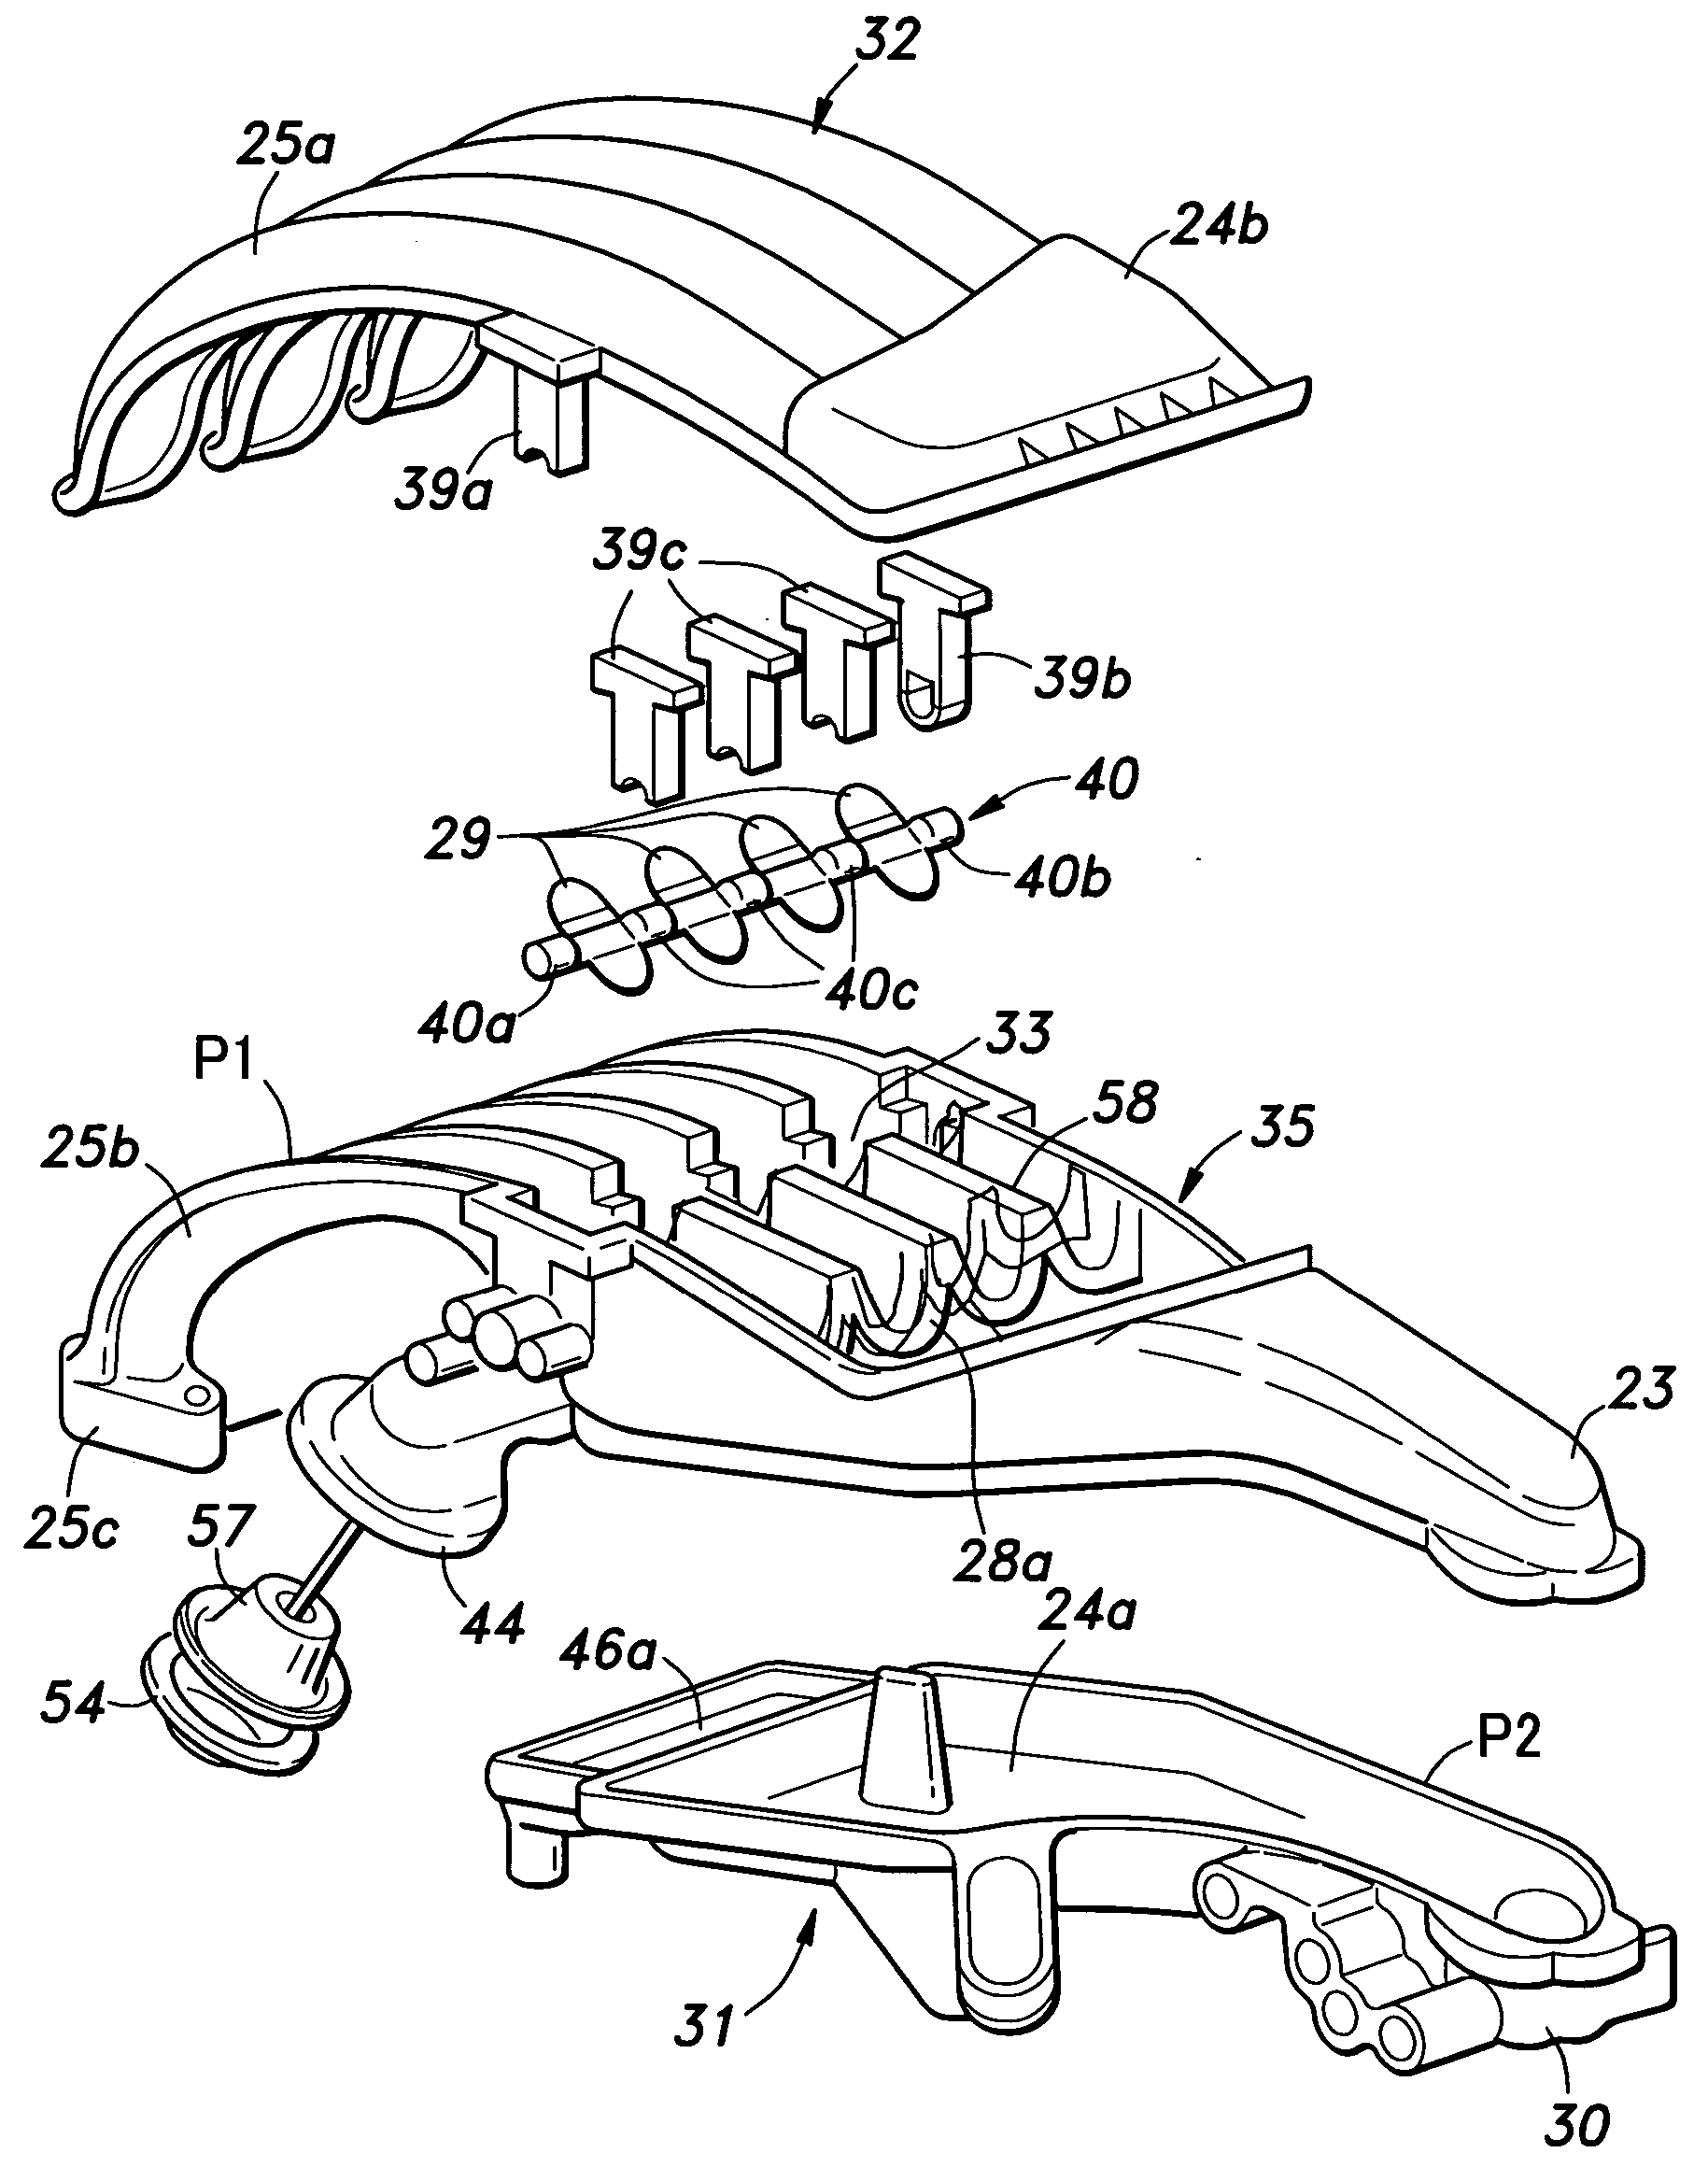 Dual port intake device for an internal combustion engine formed by injection molding